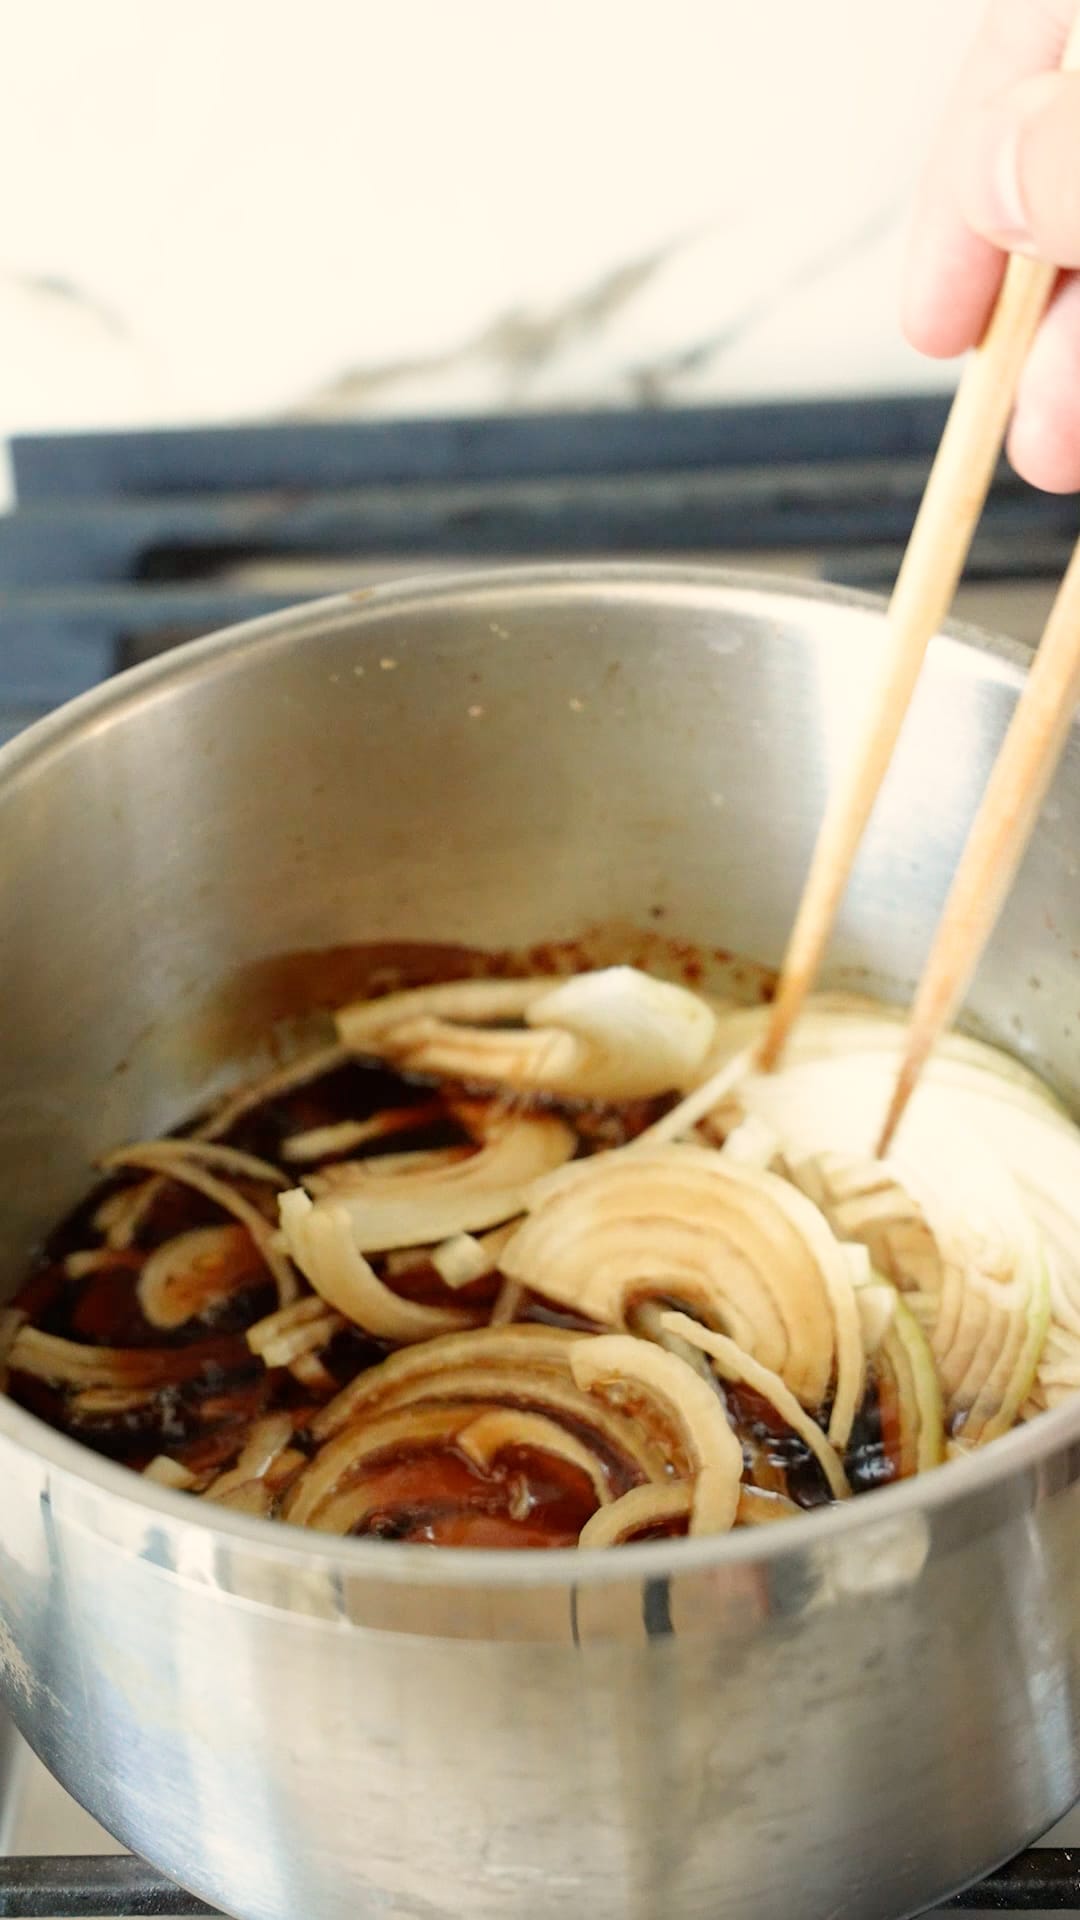 Onions cooking in the beef gyudon sauce.